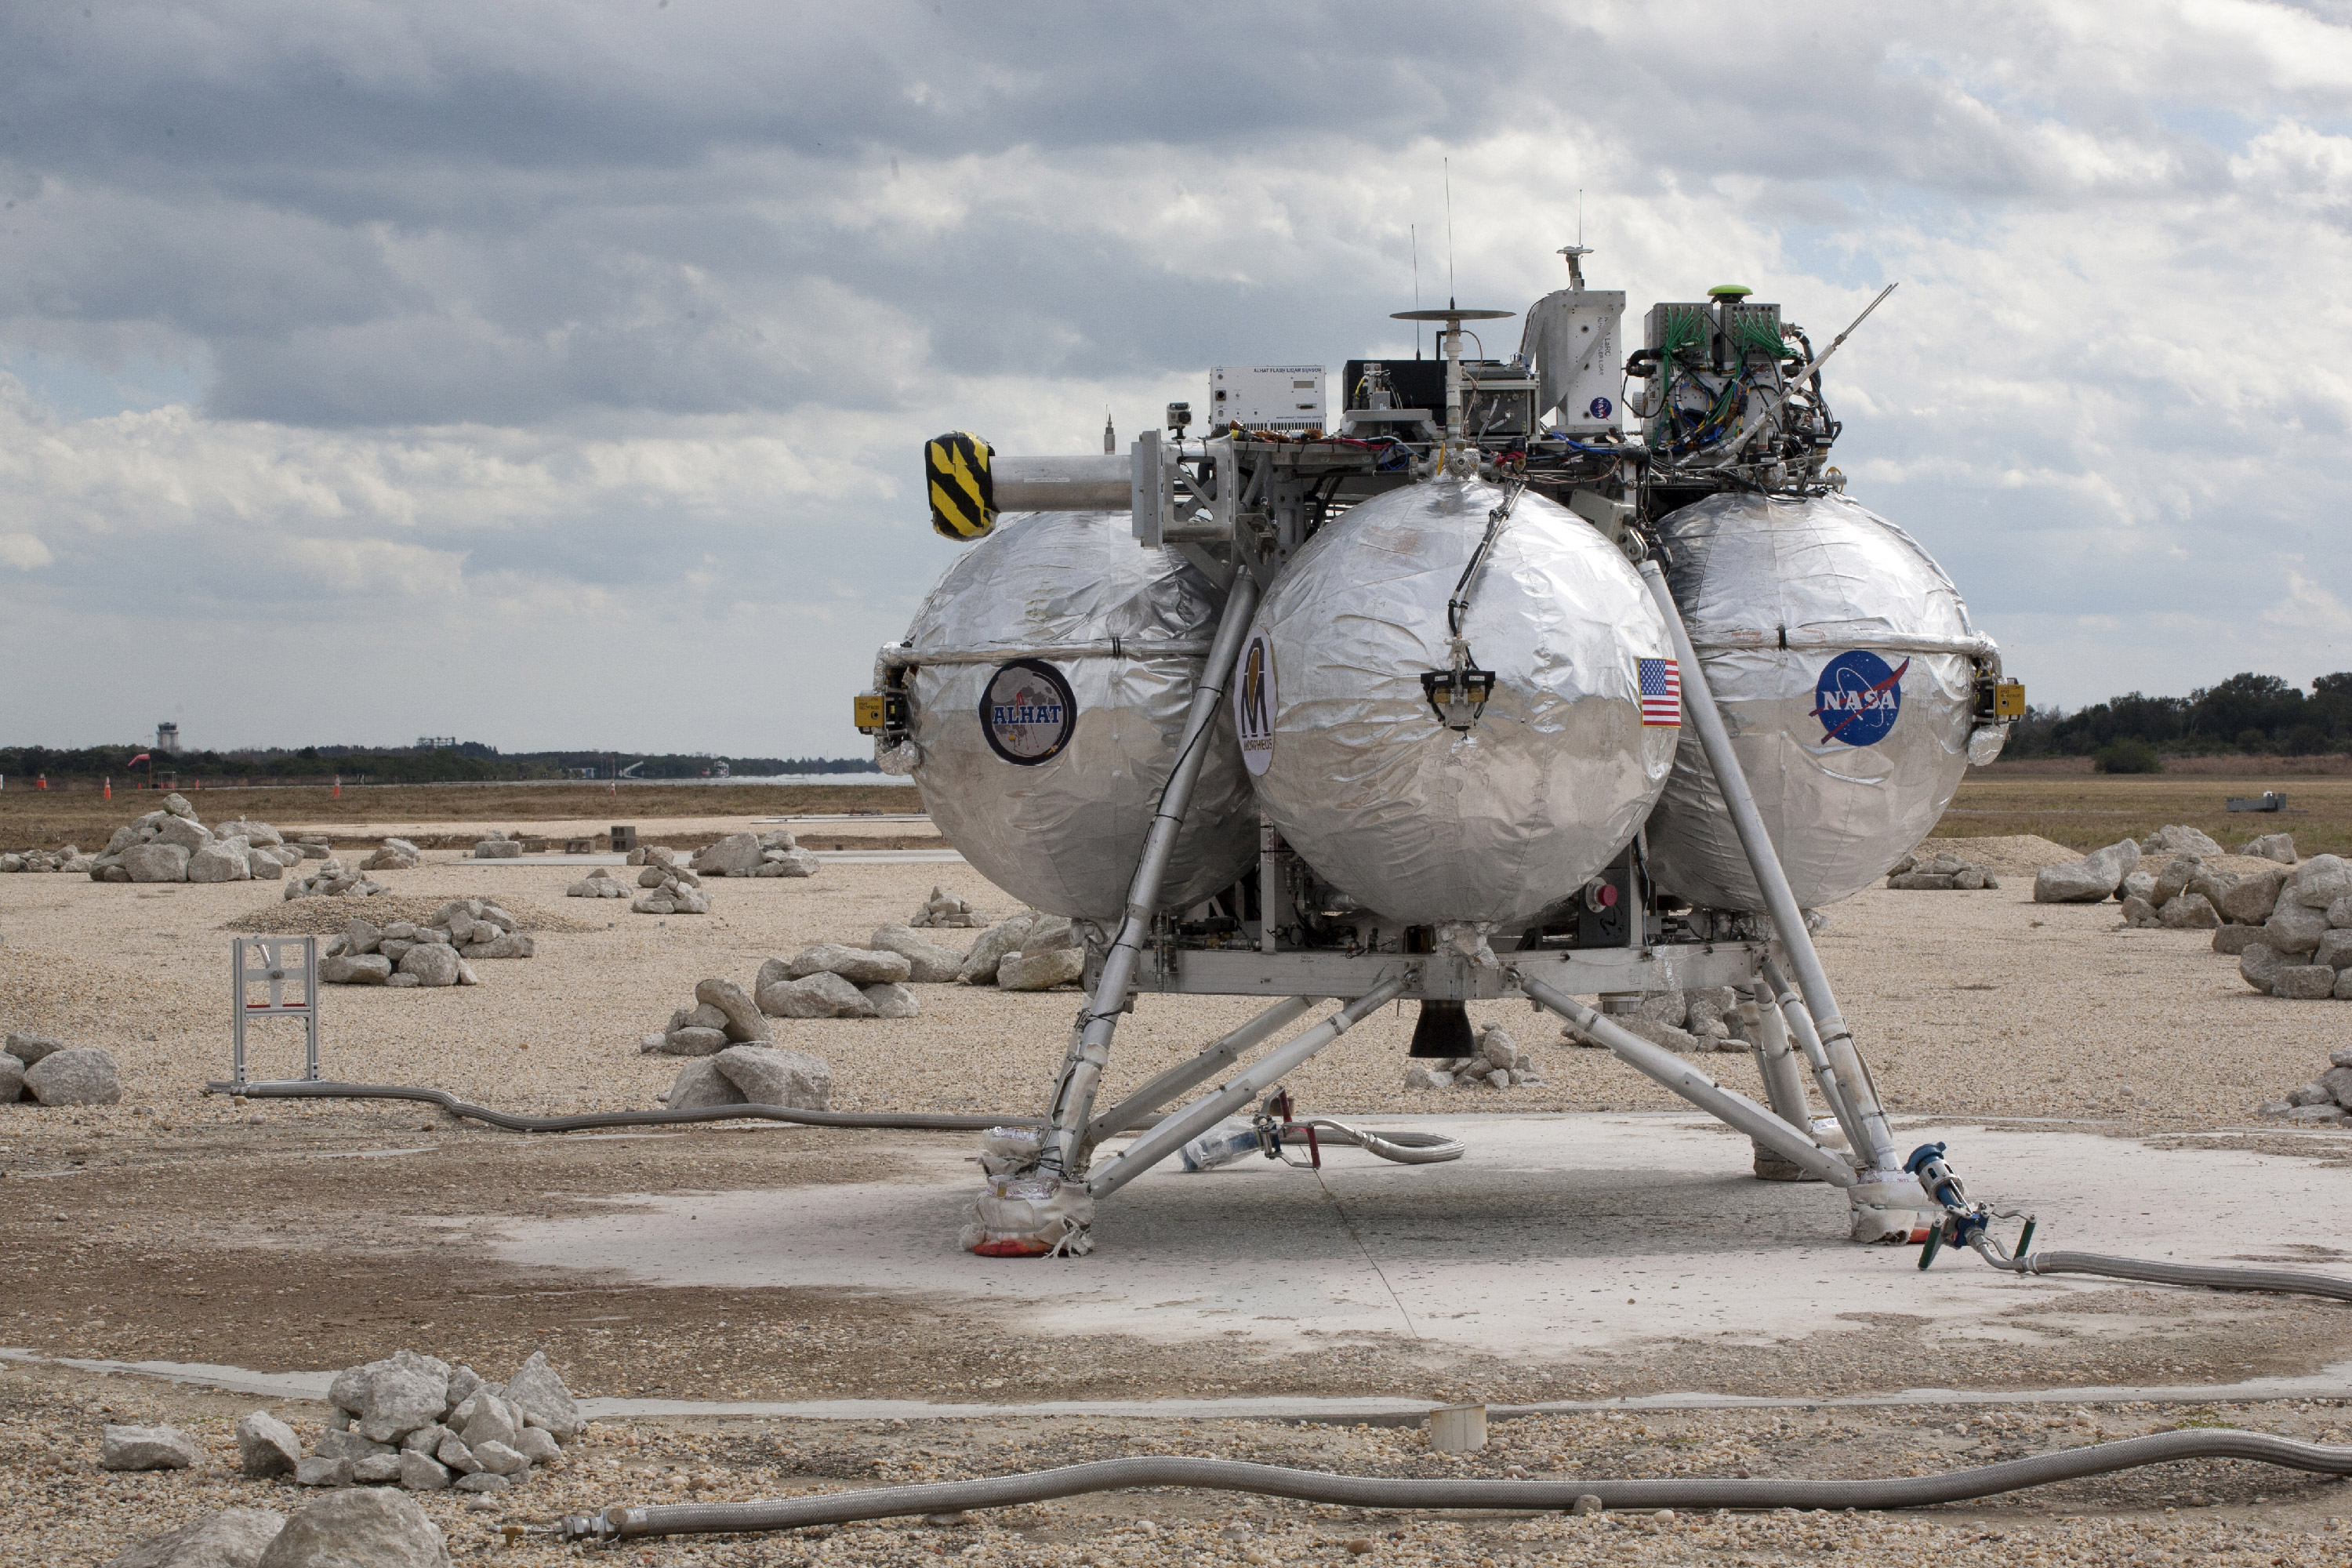 The Project Morpheus prototype lander successfully navigated the hazard field and touched down safely after launching into the sky on its fourth free-flight test. Credit: NASA/Kim Shiflett